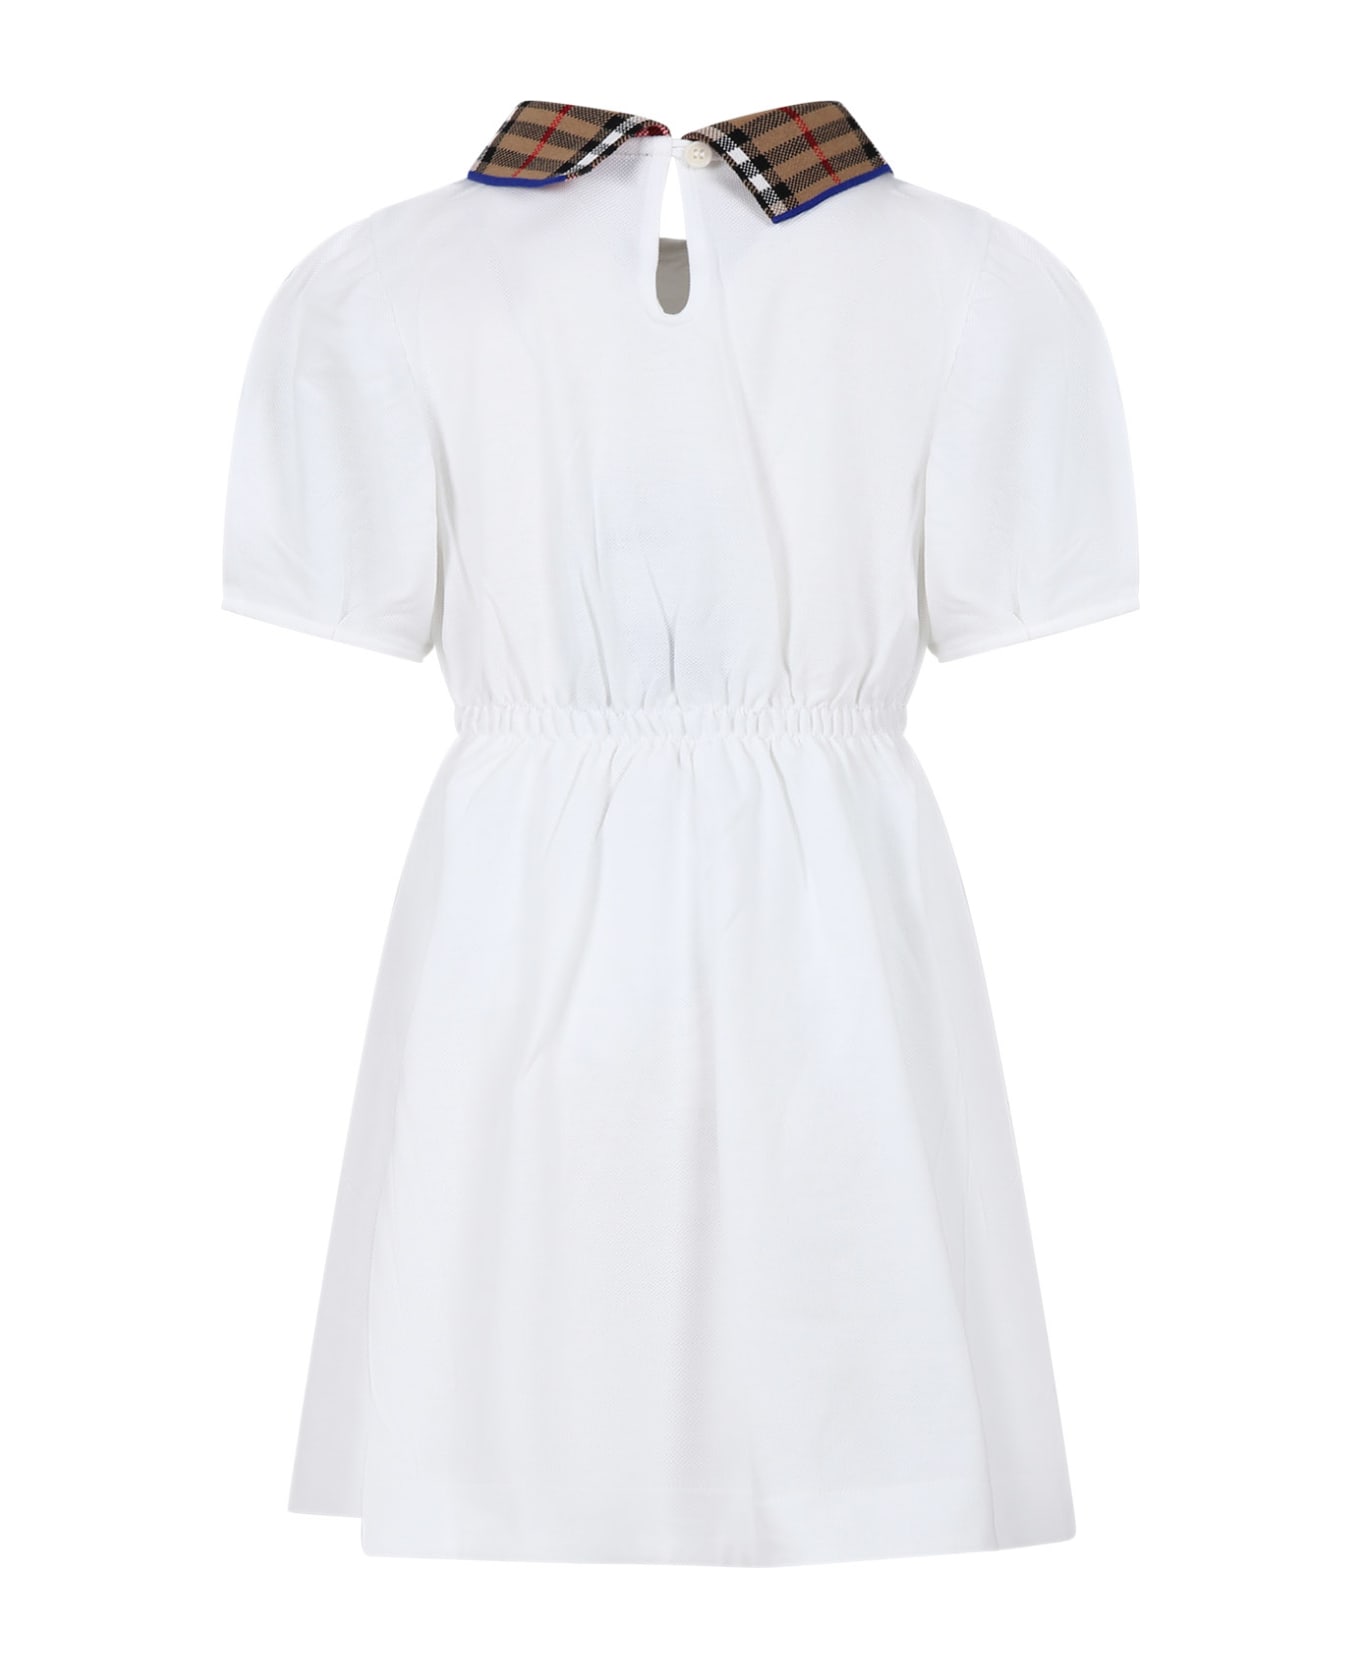 Burberry White Dress For Girl With Vintage Check On The Collar - White